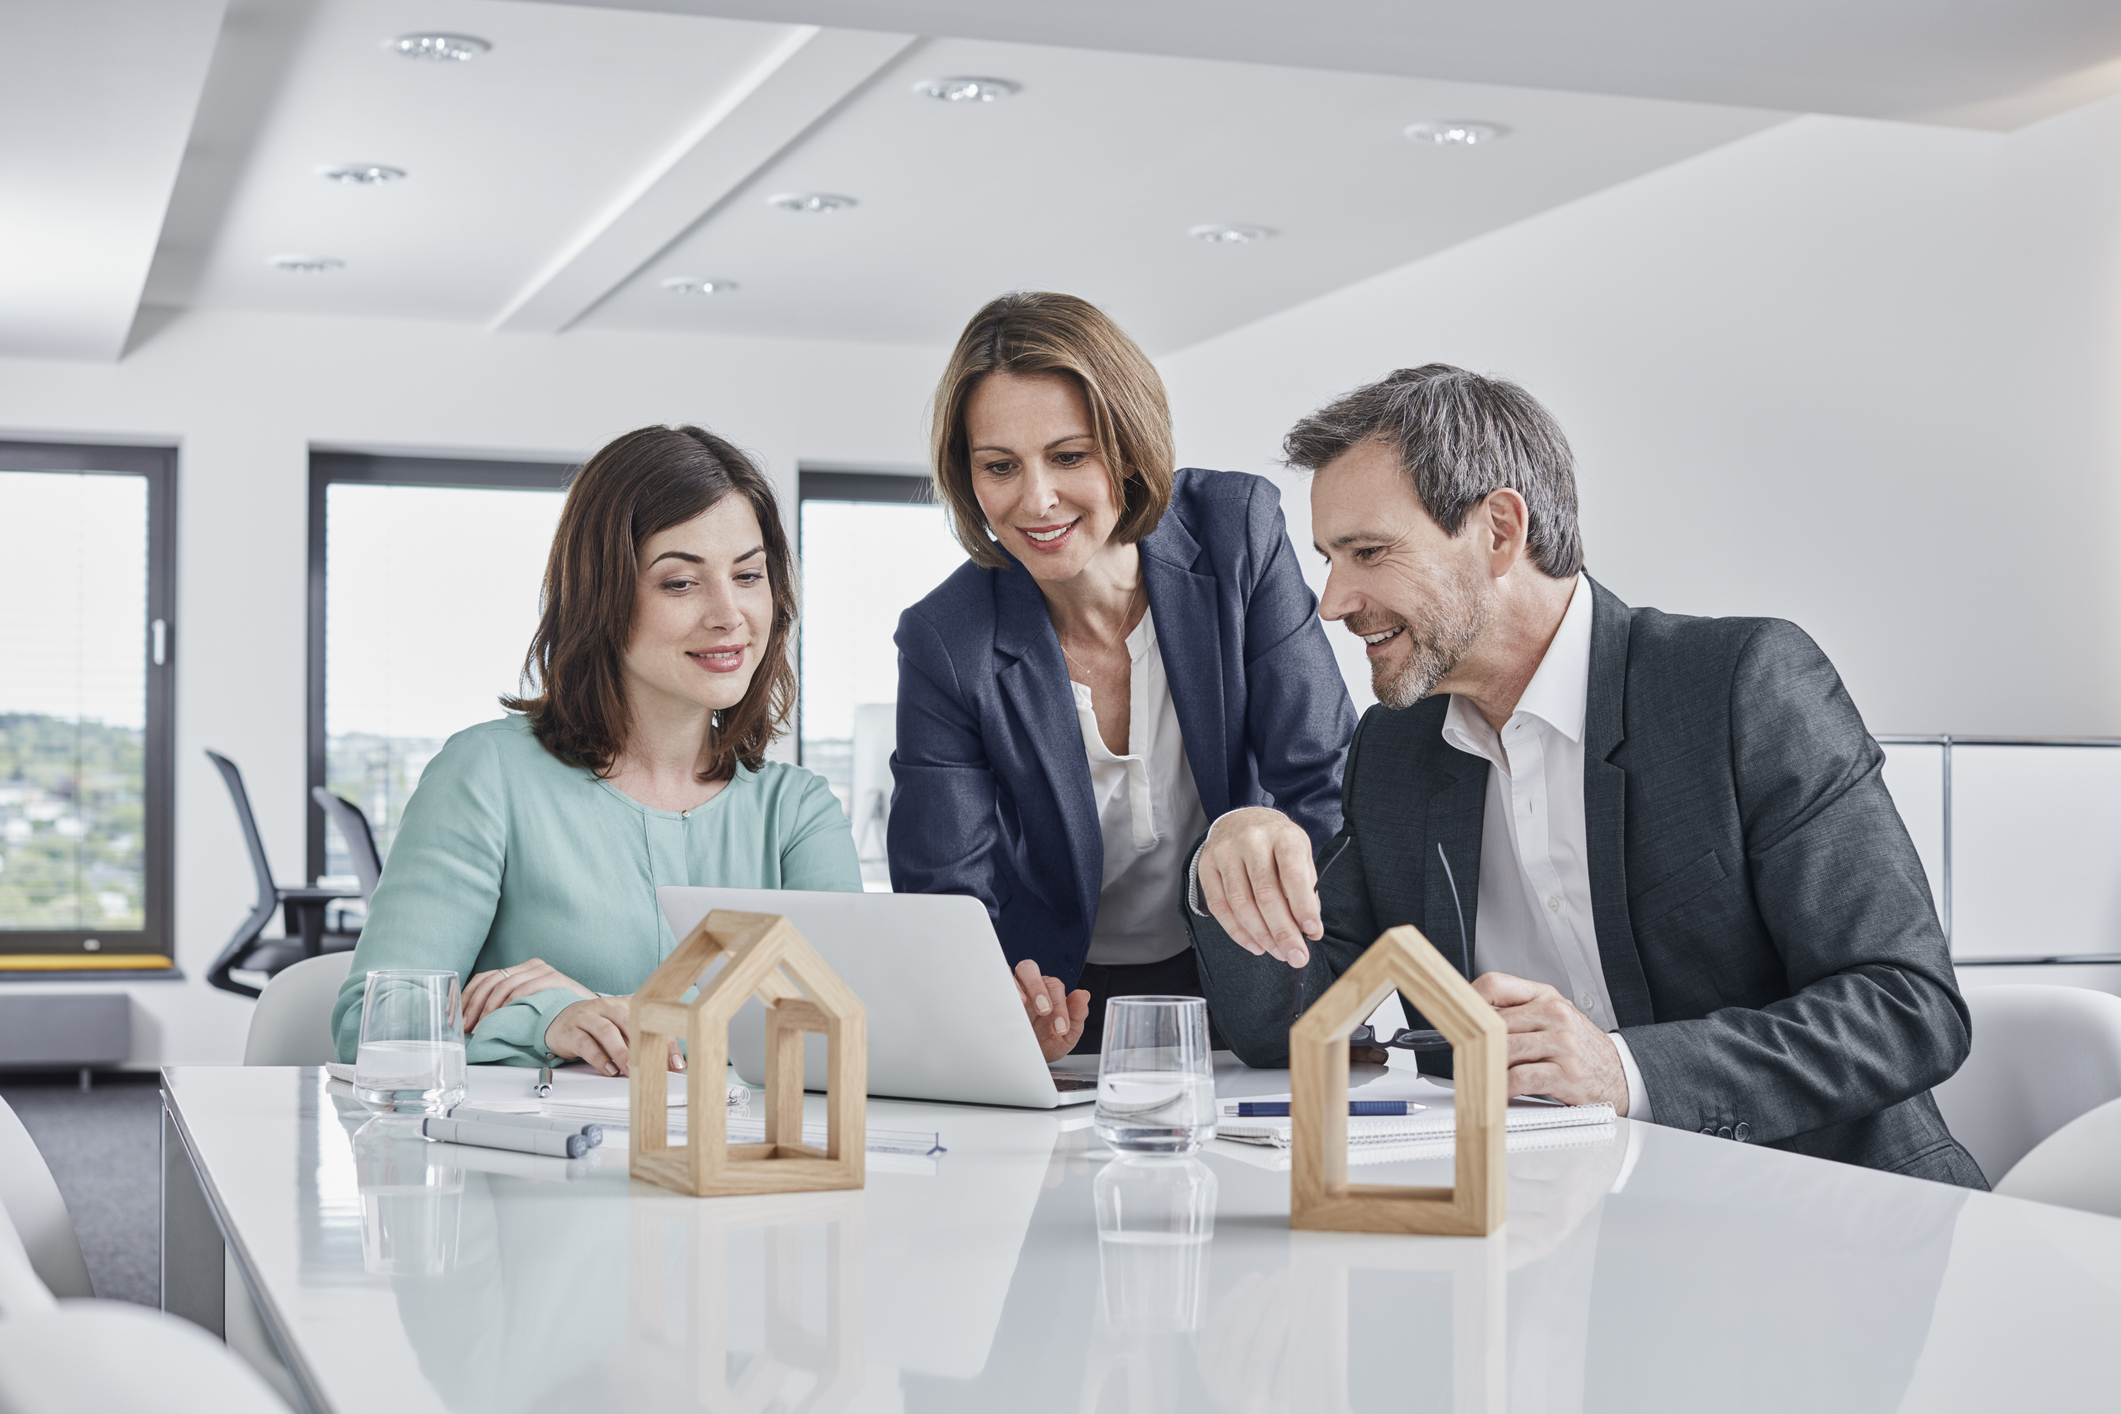 Connect with a real estate expert at Prospera.